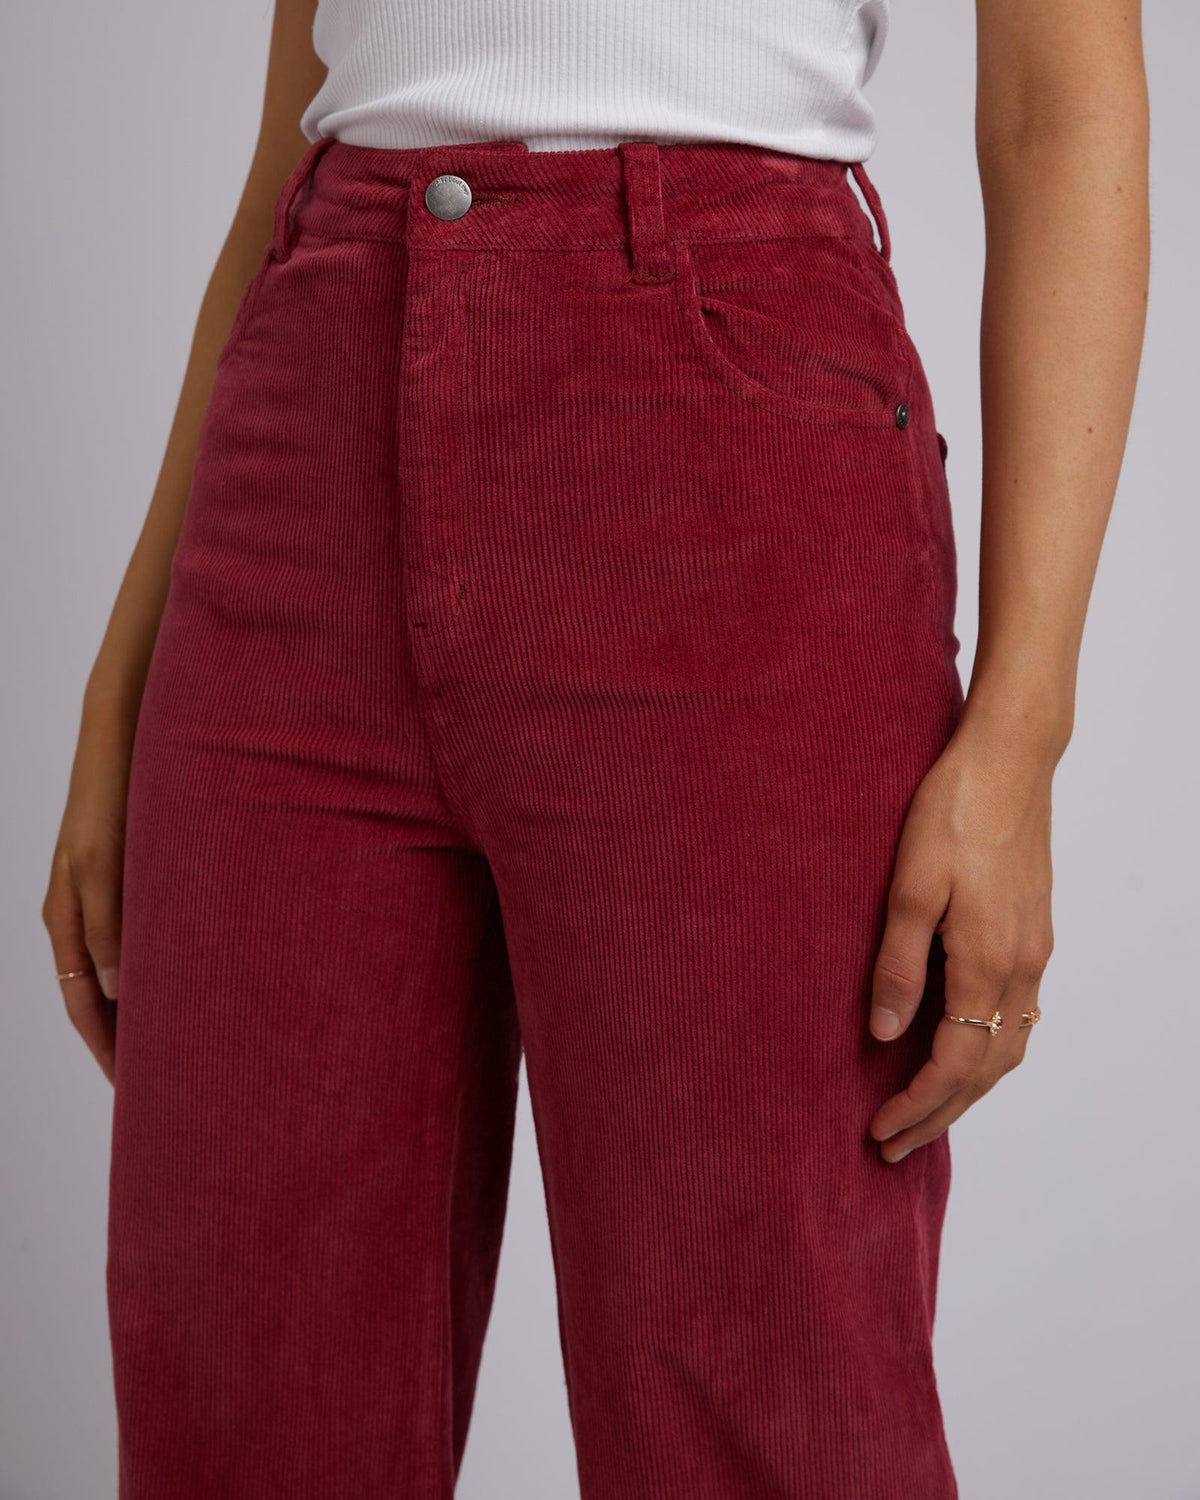 All About Eve-Camilla Cord Pant Port-Edge Clothing